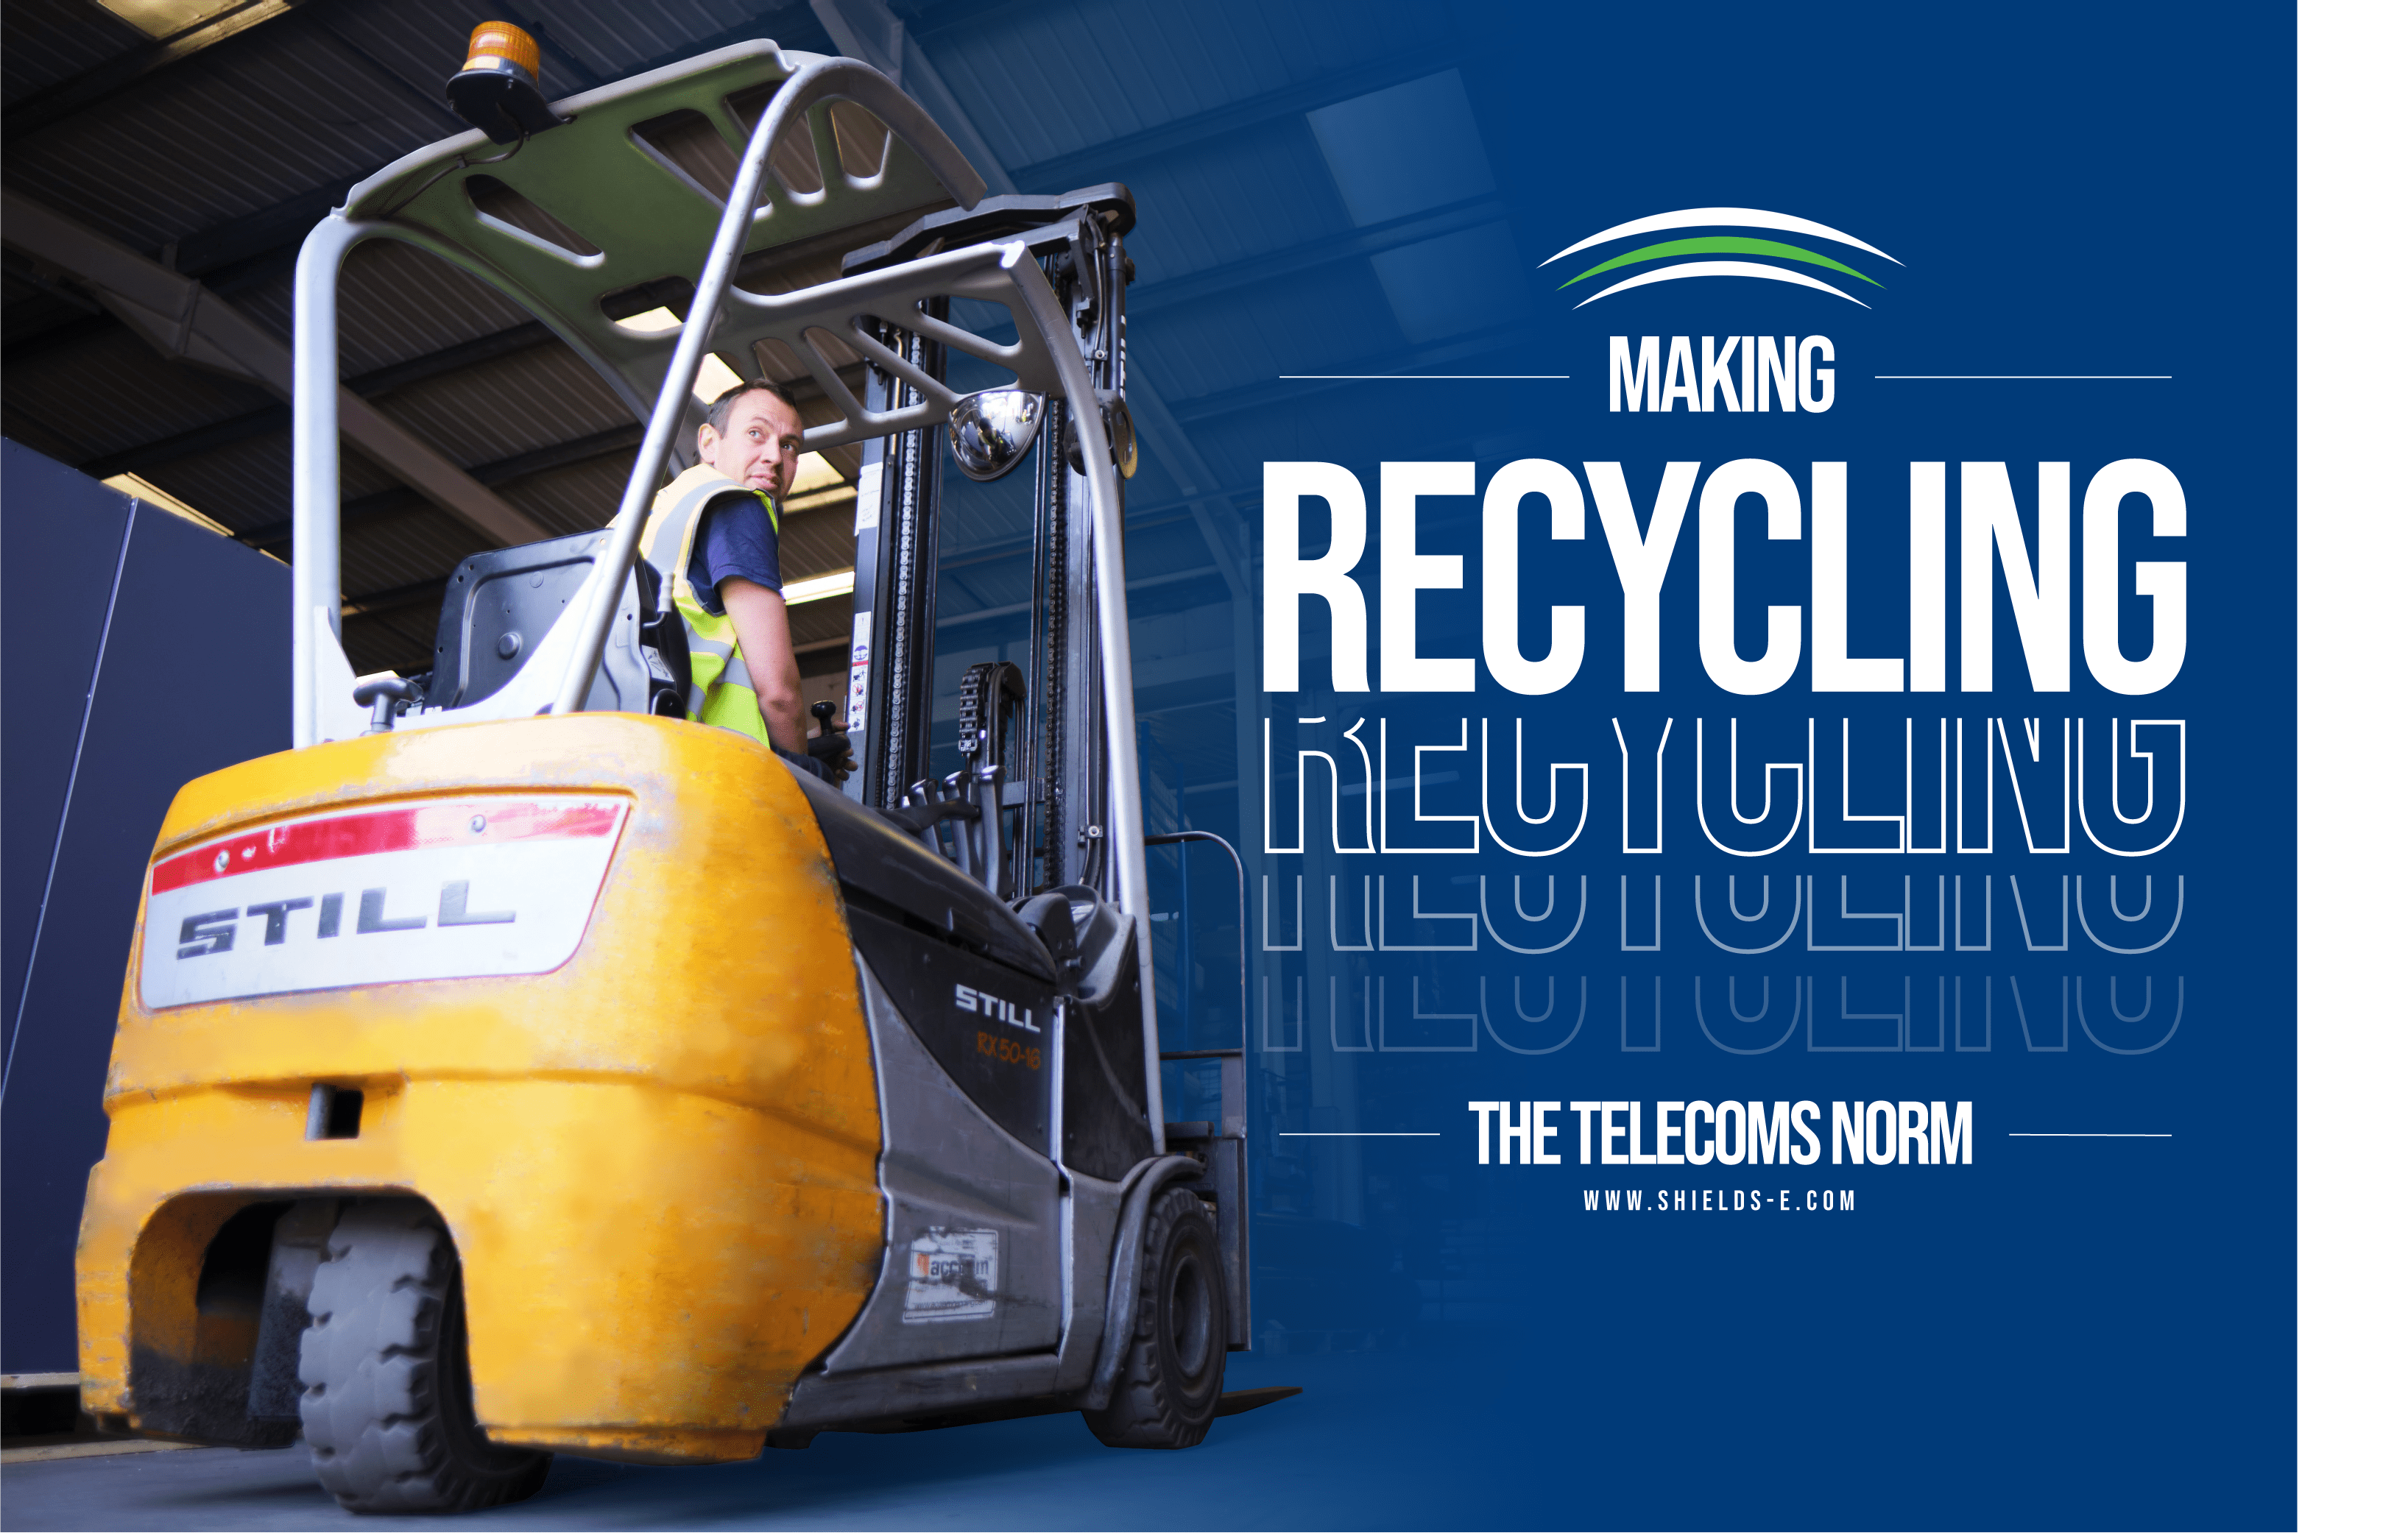 Making recycling the Telecoms norm blog header image